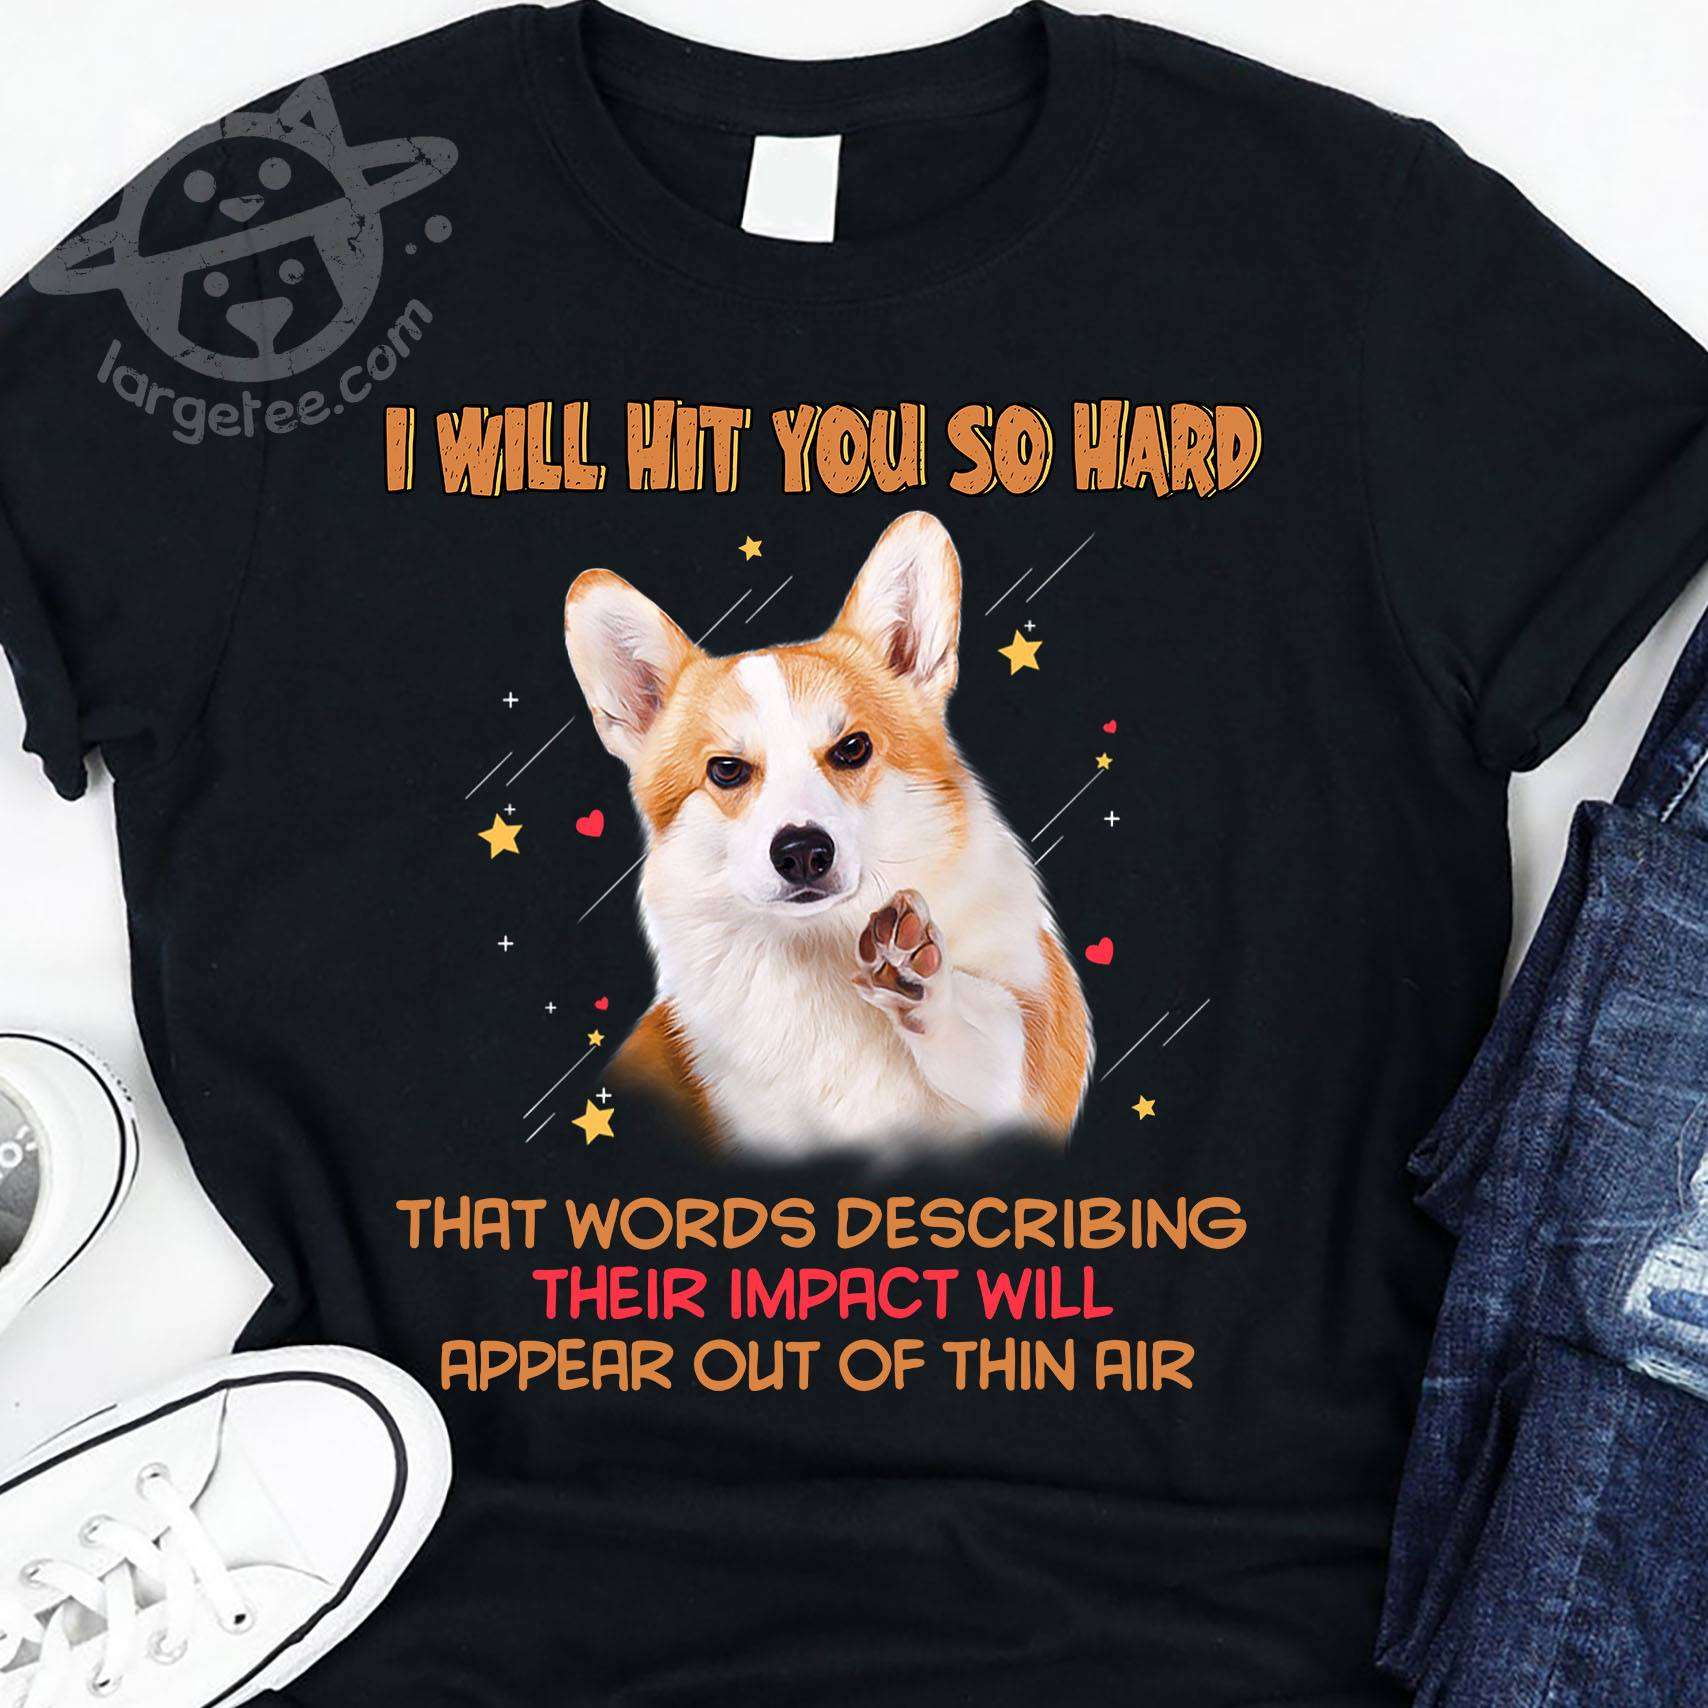 Corgi Dog - I will hit you so hard that words describing their impact will appear uot of thin air